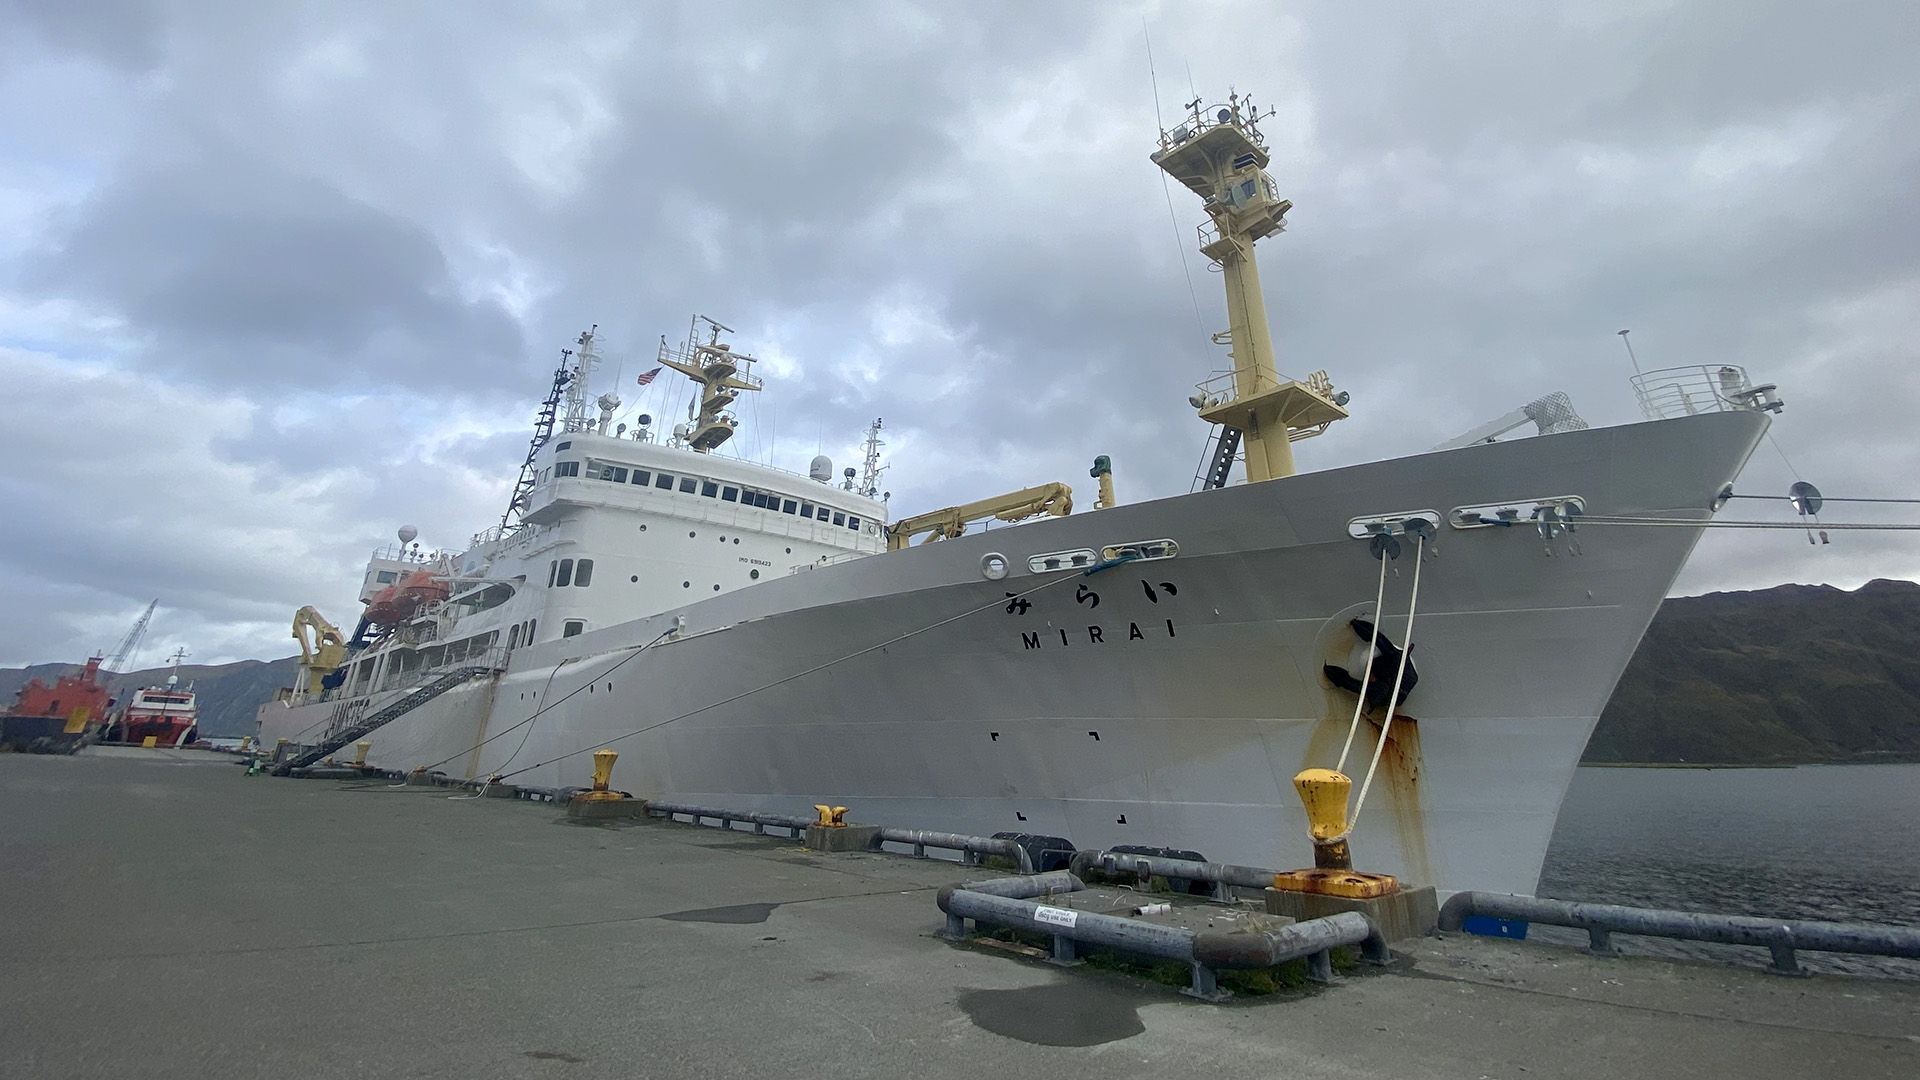 The R/V Mirai is a 360-foot research vessel operated by JAMSTEC, the Japanese agency for marine science